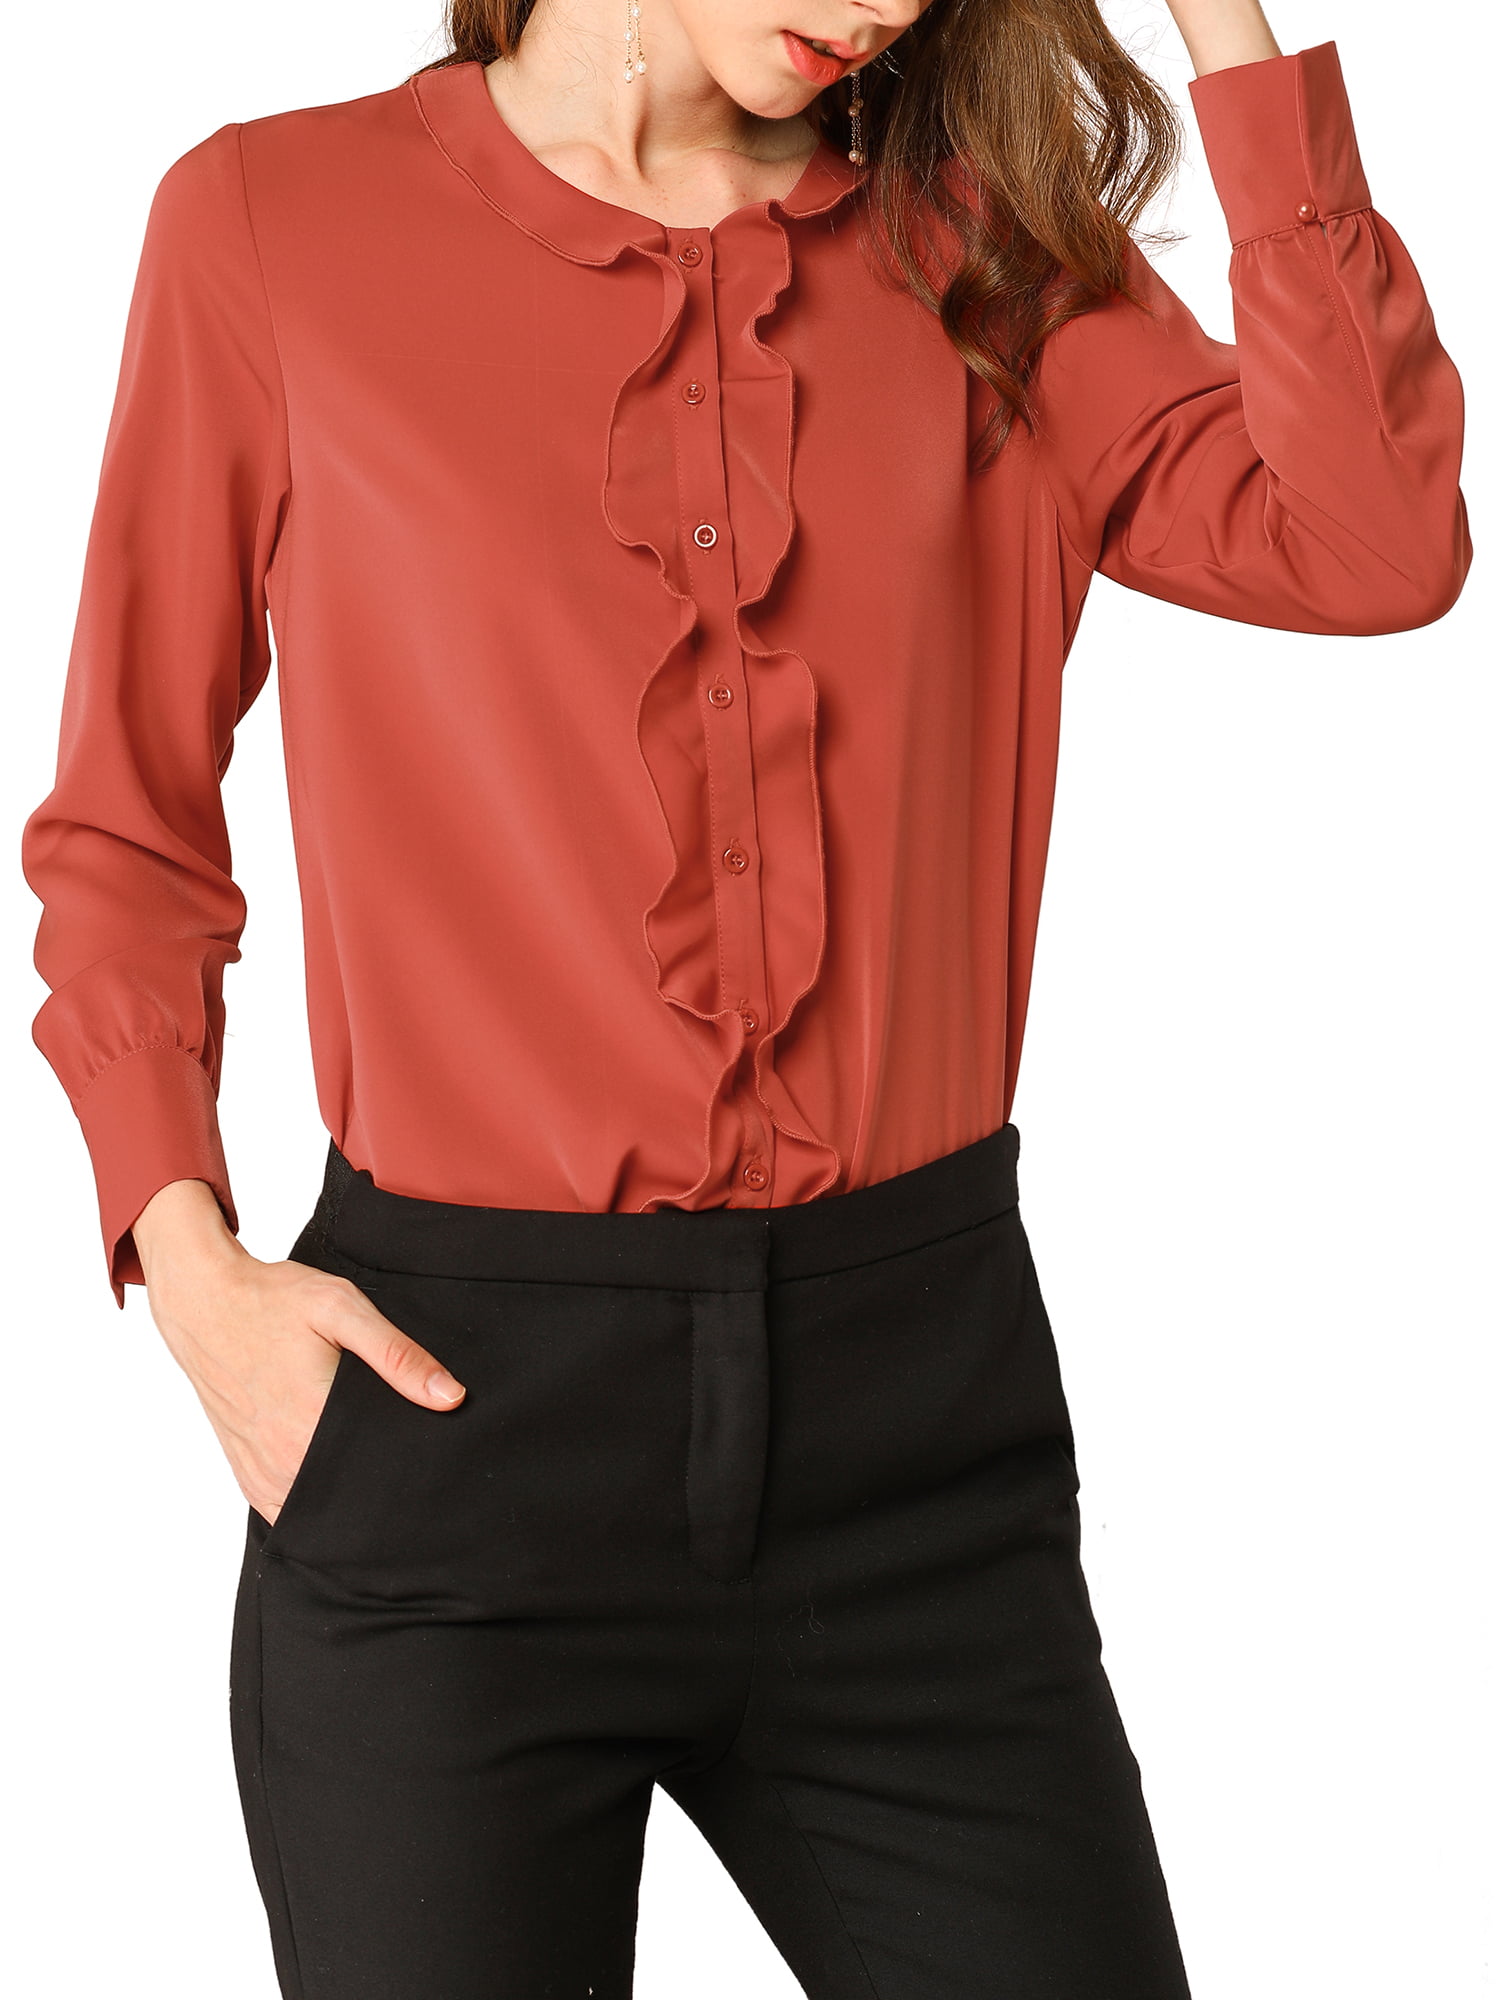 Champagne Satin Button Down Solid Collar FRONT RUFFLE Shirt Long Sleeve Blouse